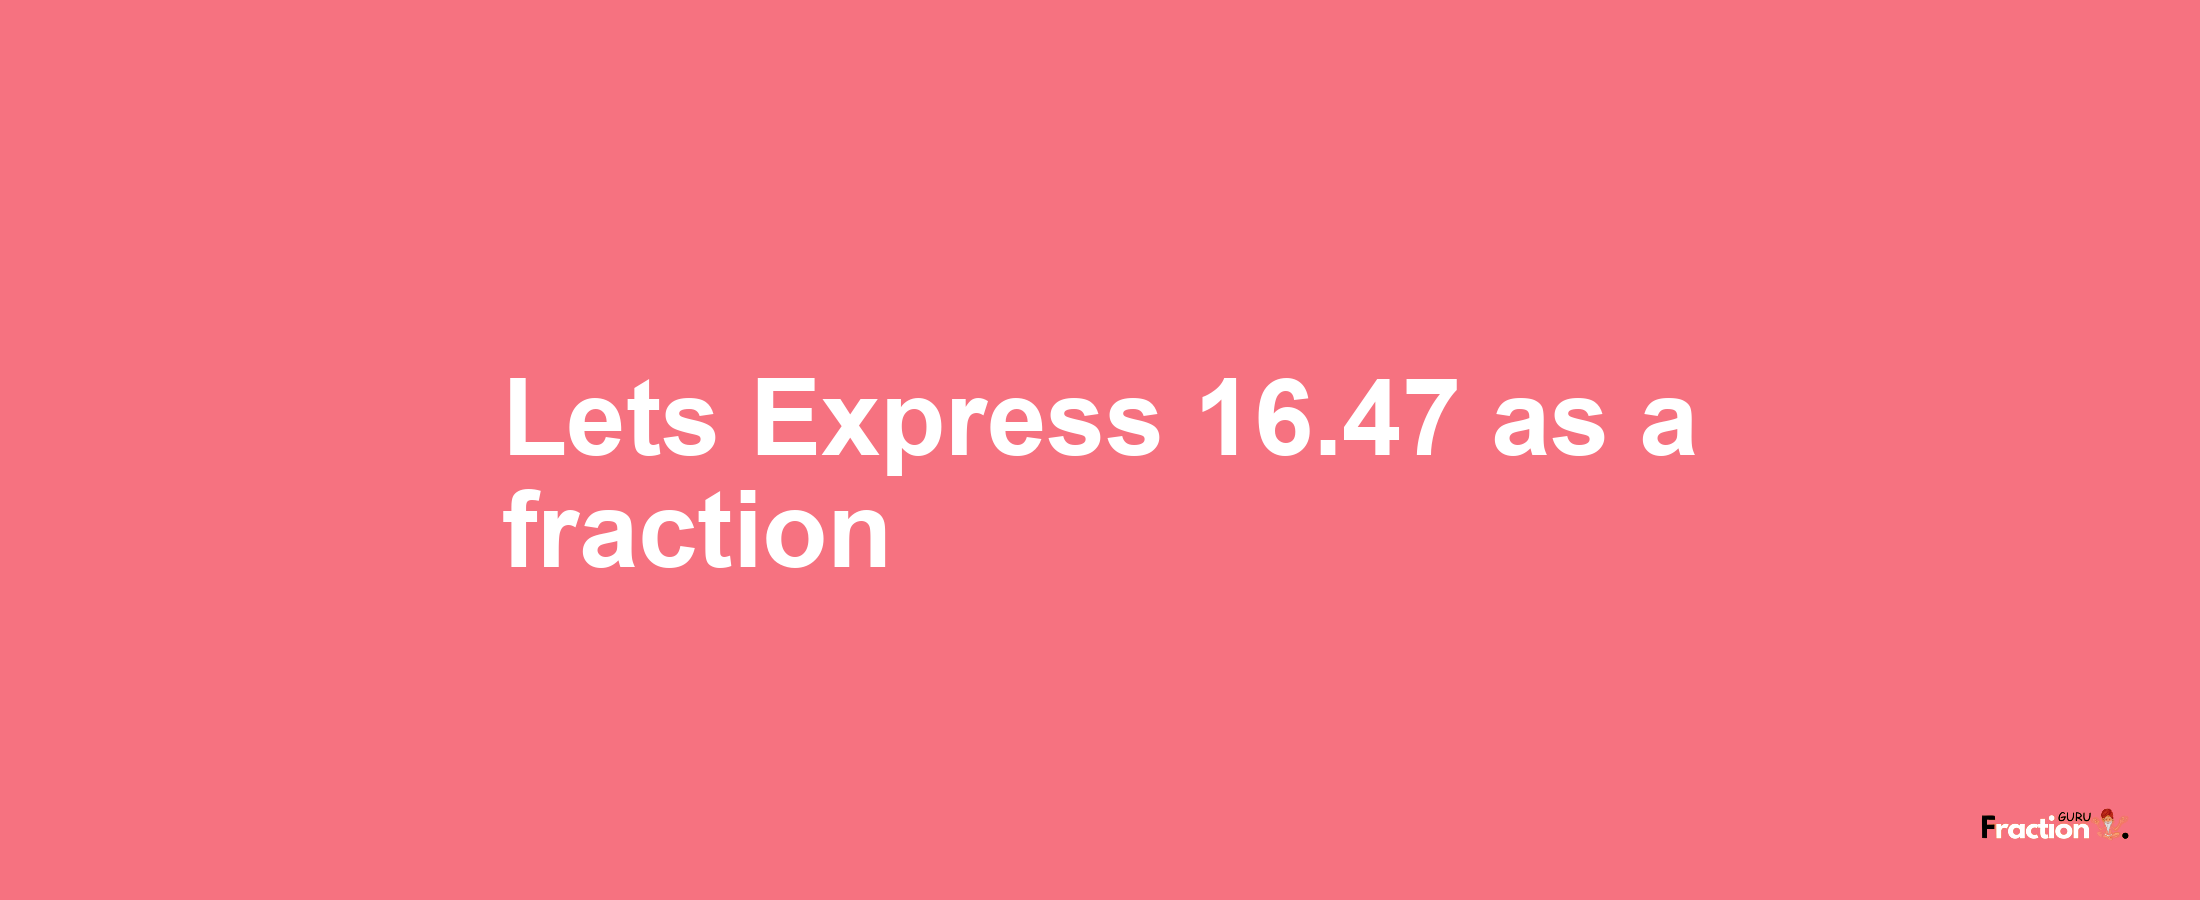 Lets Express 16.47 as afraction